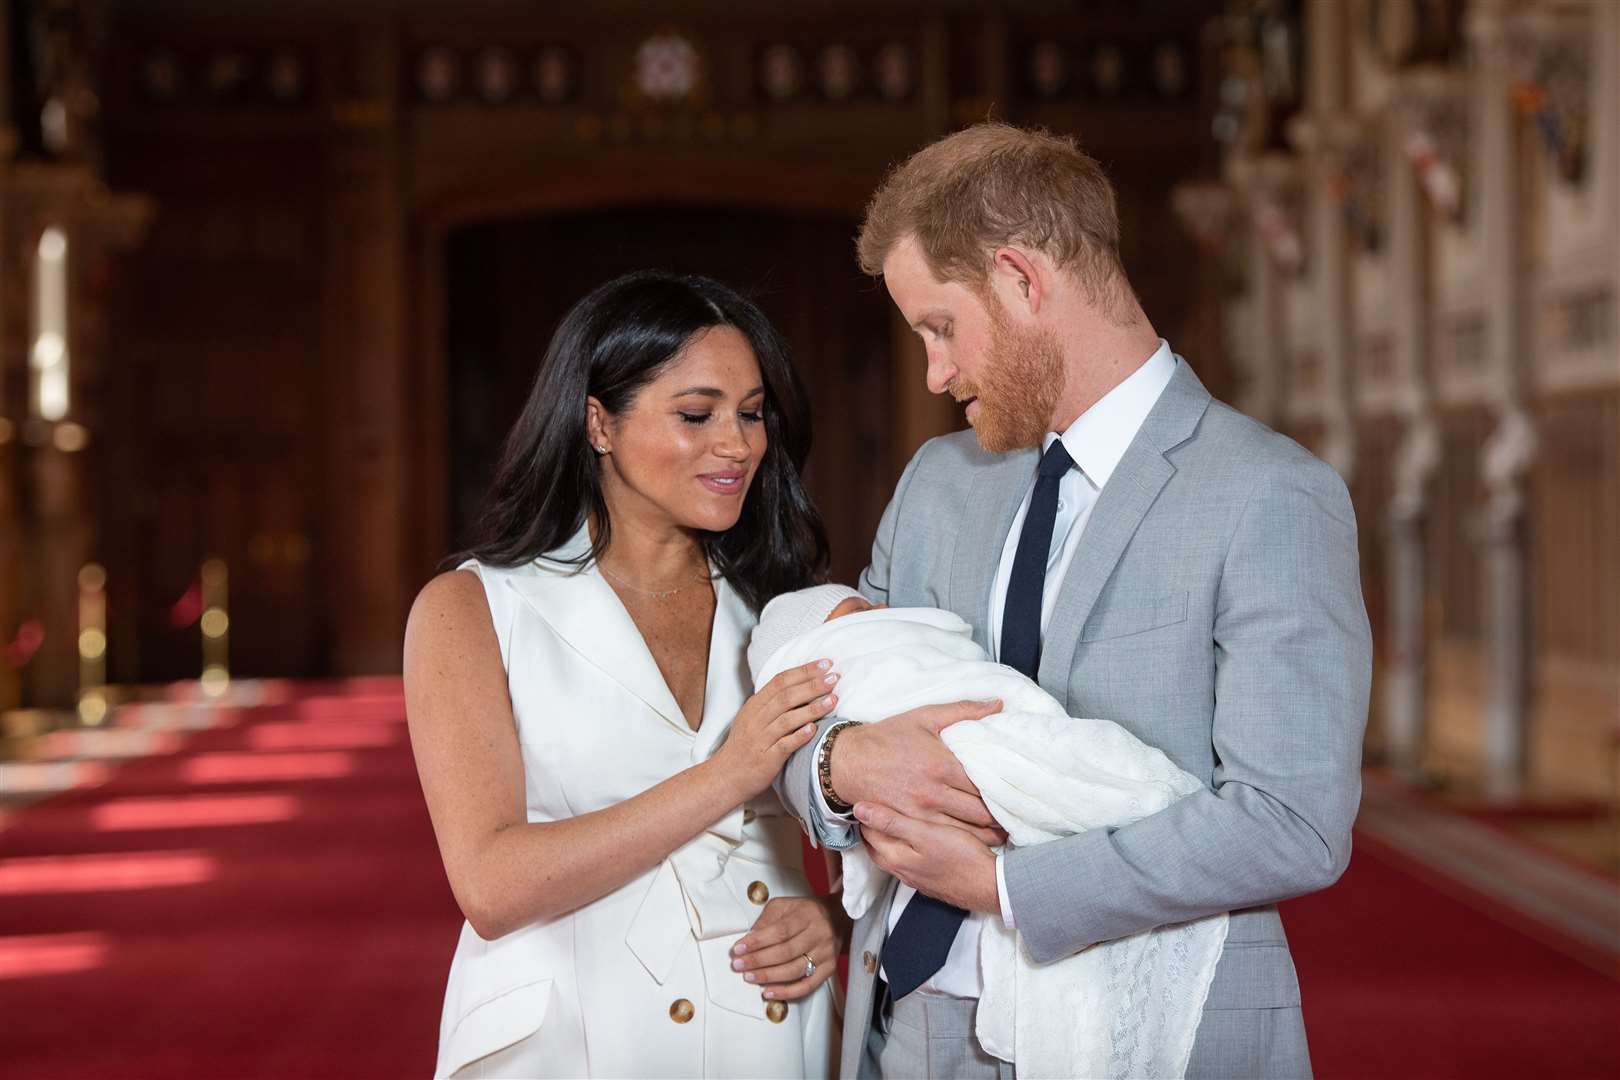 Meghan revealed she felt suicidal when pregnant with son Archie (Dominic Lipinski/PA)